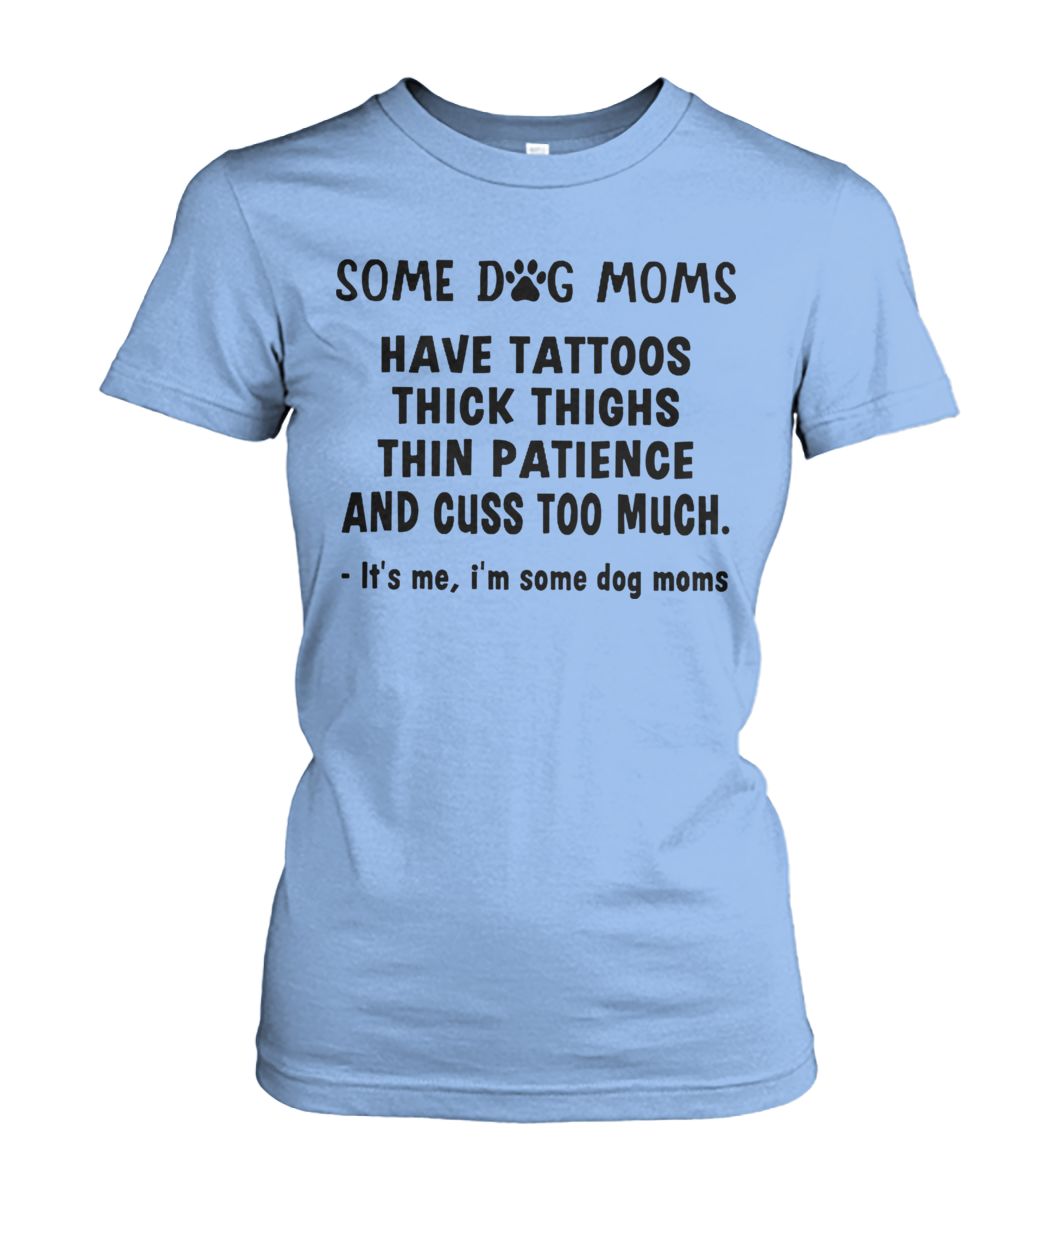 Some dog moms have tattoos thick thinks thin paticence and cuss too much it's me I'm some dog moms women's crew tee